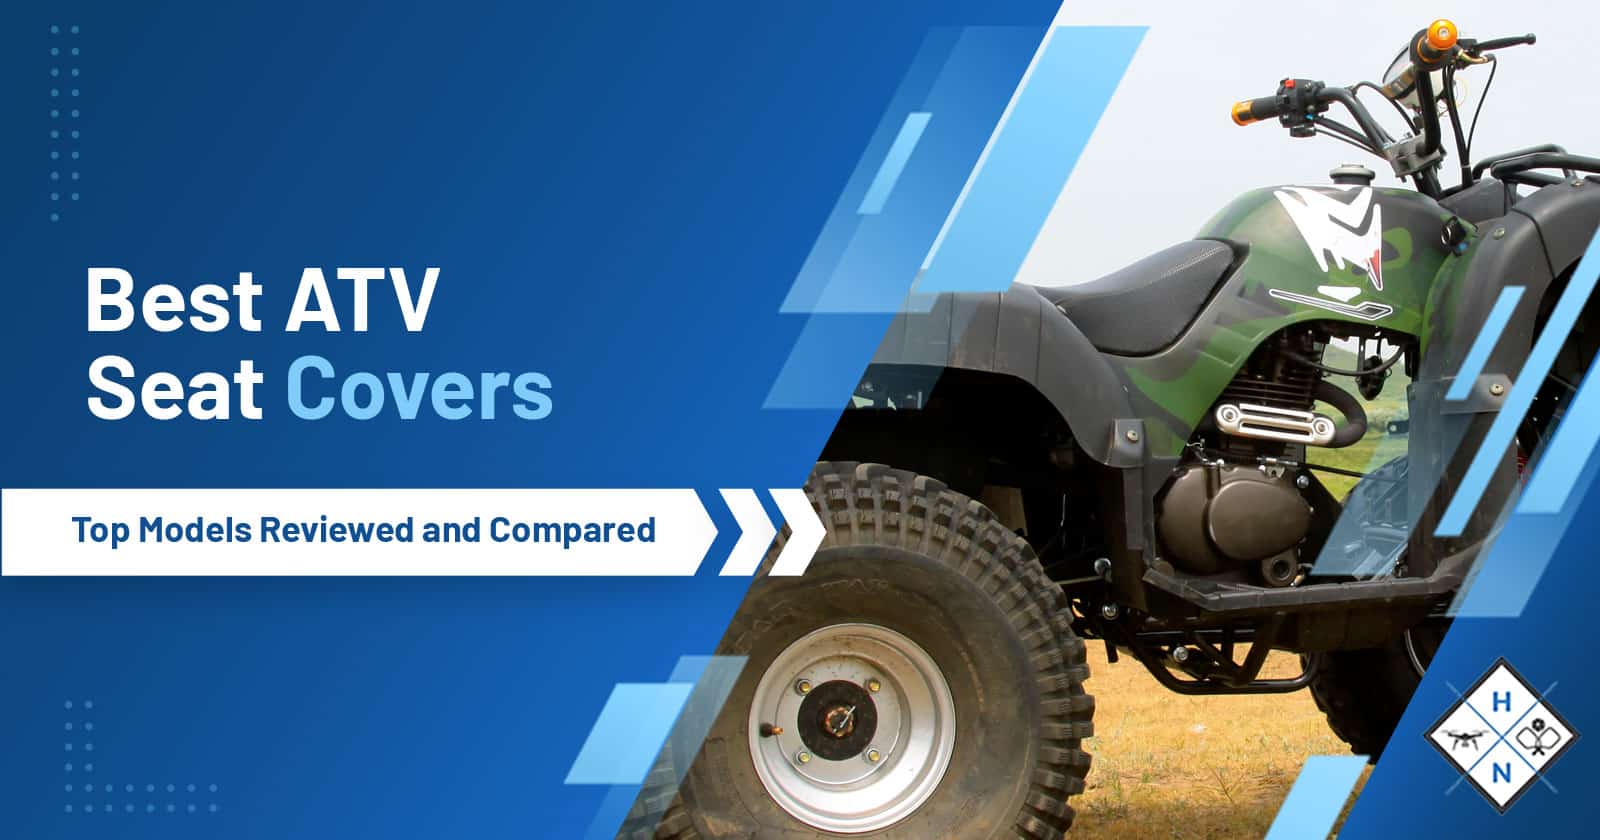 Best ATV Seat Covers – Top Models Reviewed and Compared